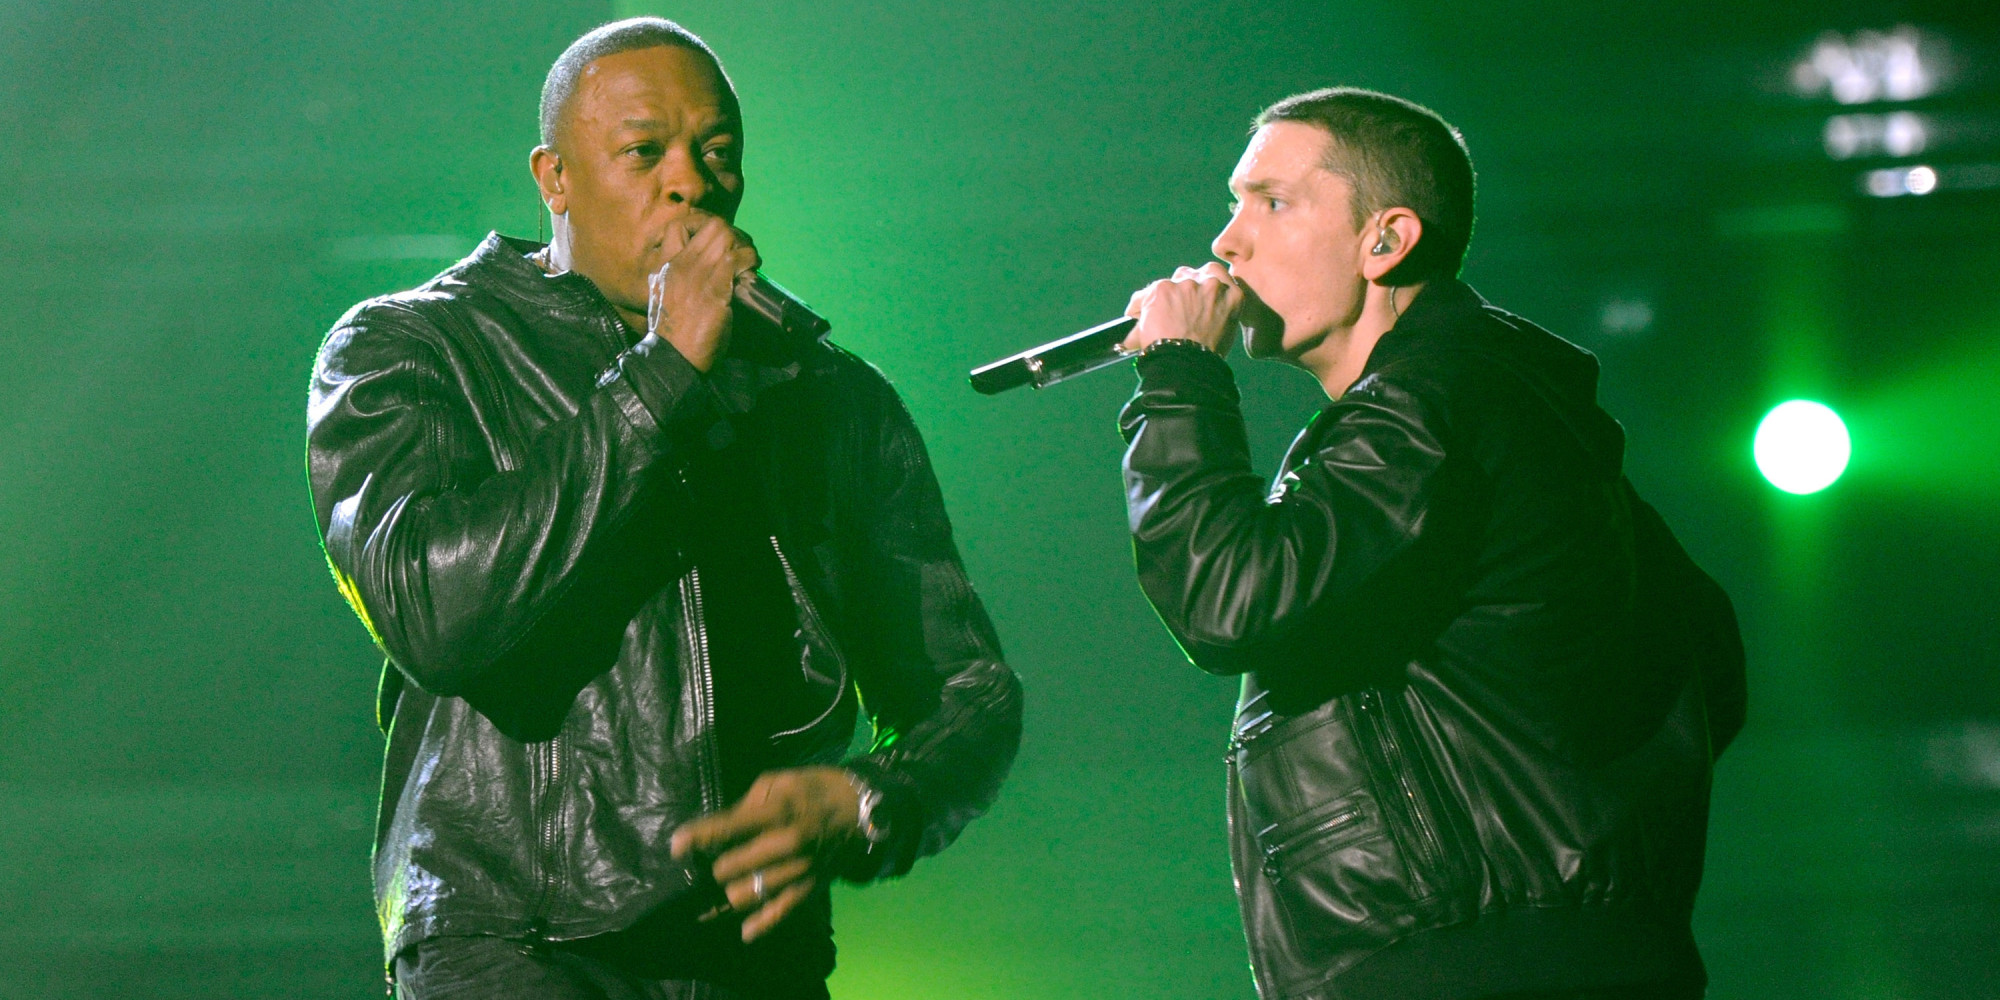 Dr Dre and Eminem perform onstage during The 53rd Annual GRAMMY Awards held at Staples Center on February 13, 2011 in Los Angeles, California.